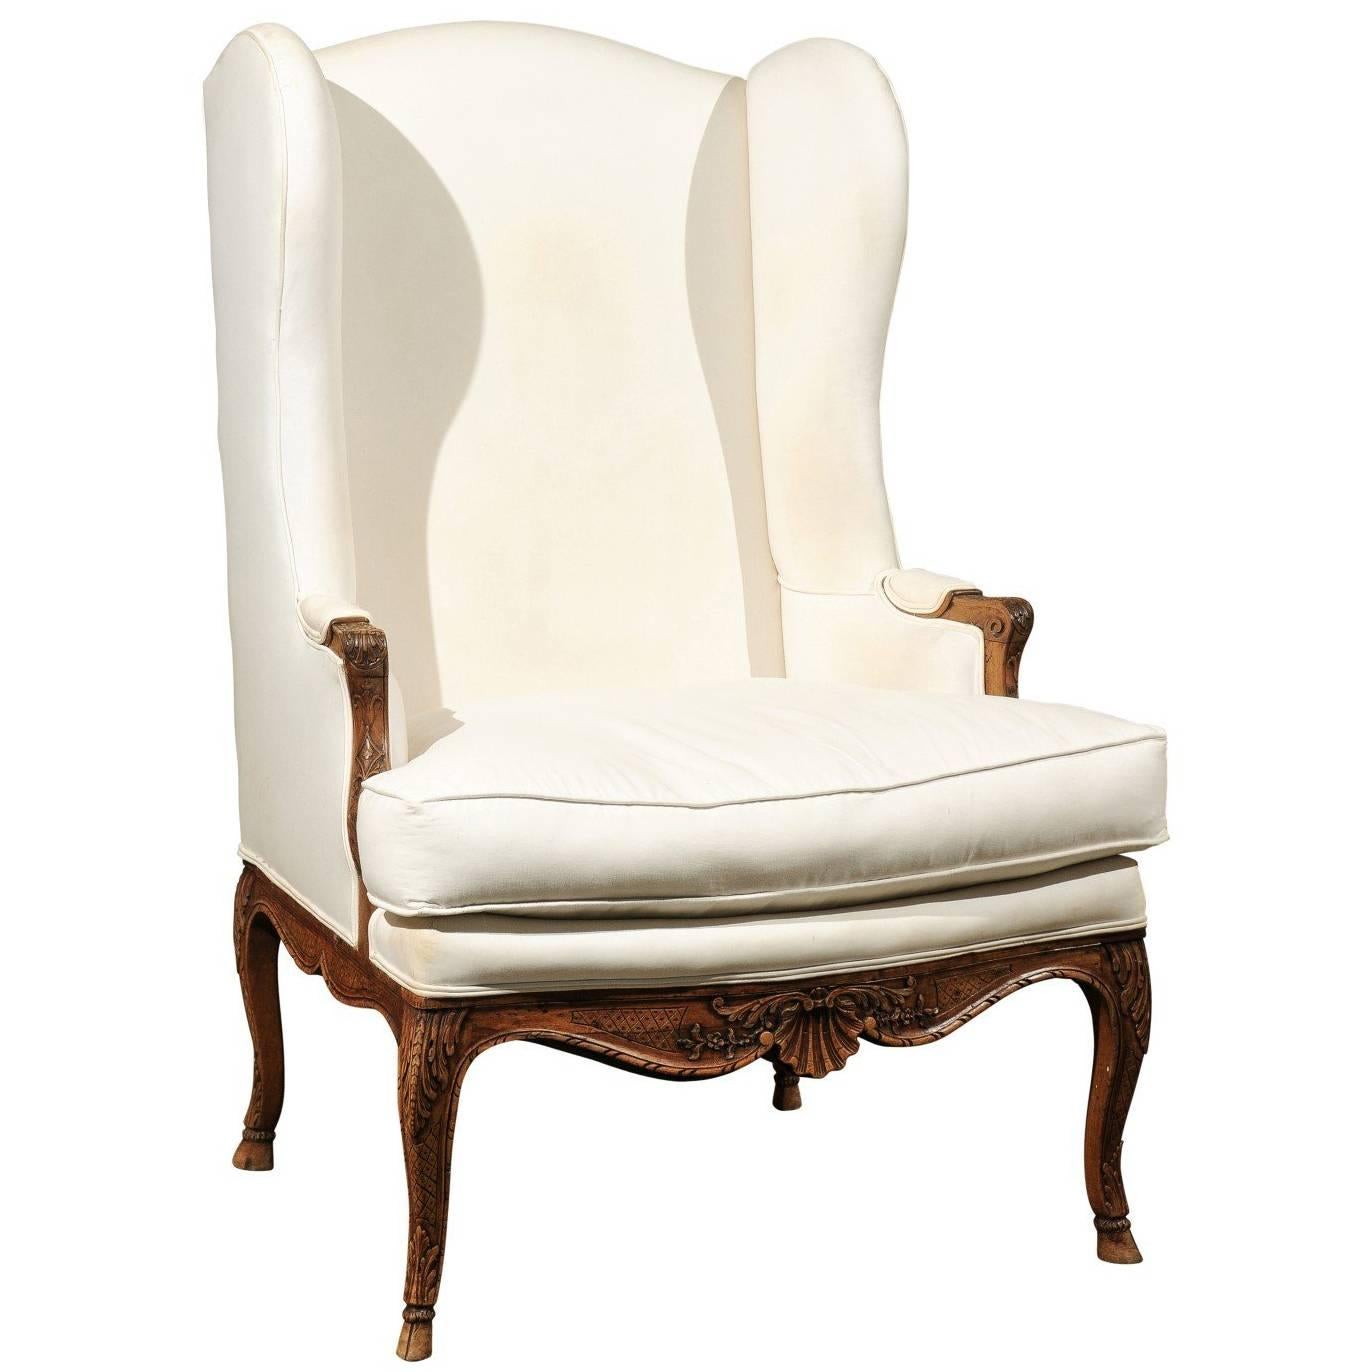 French Louis XV Style Early 19th Century Wingback Chair with Scalloped Skirt